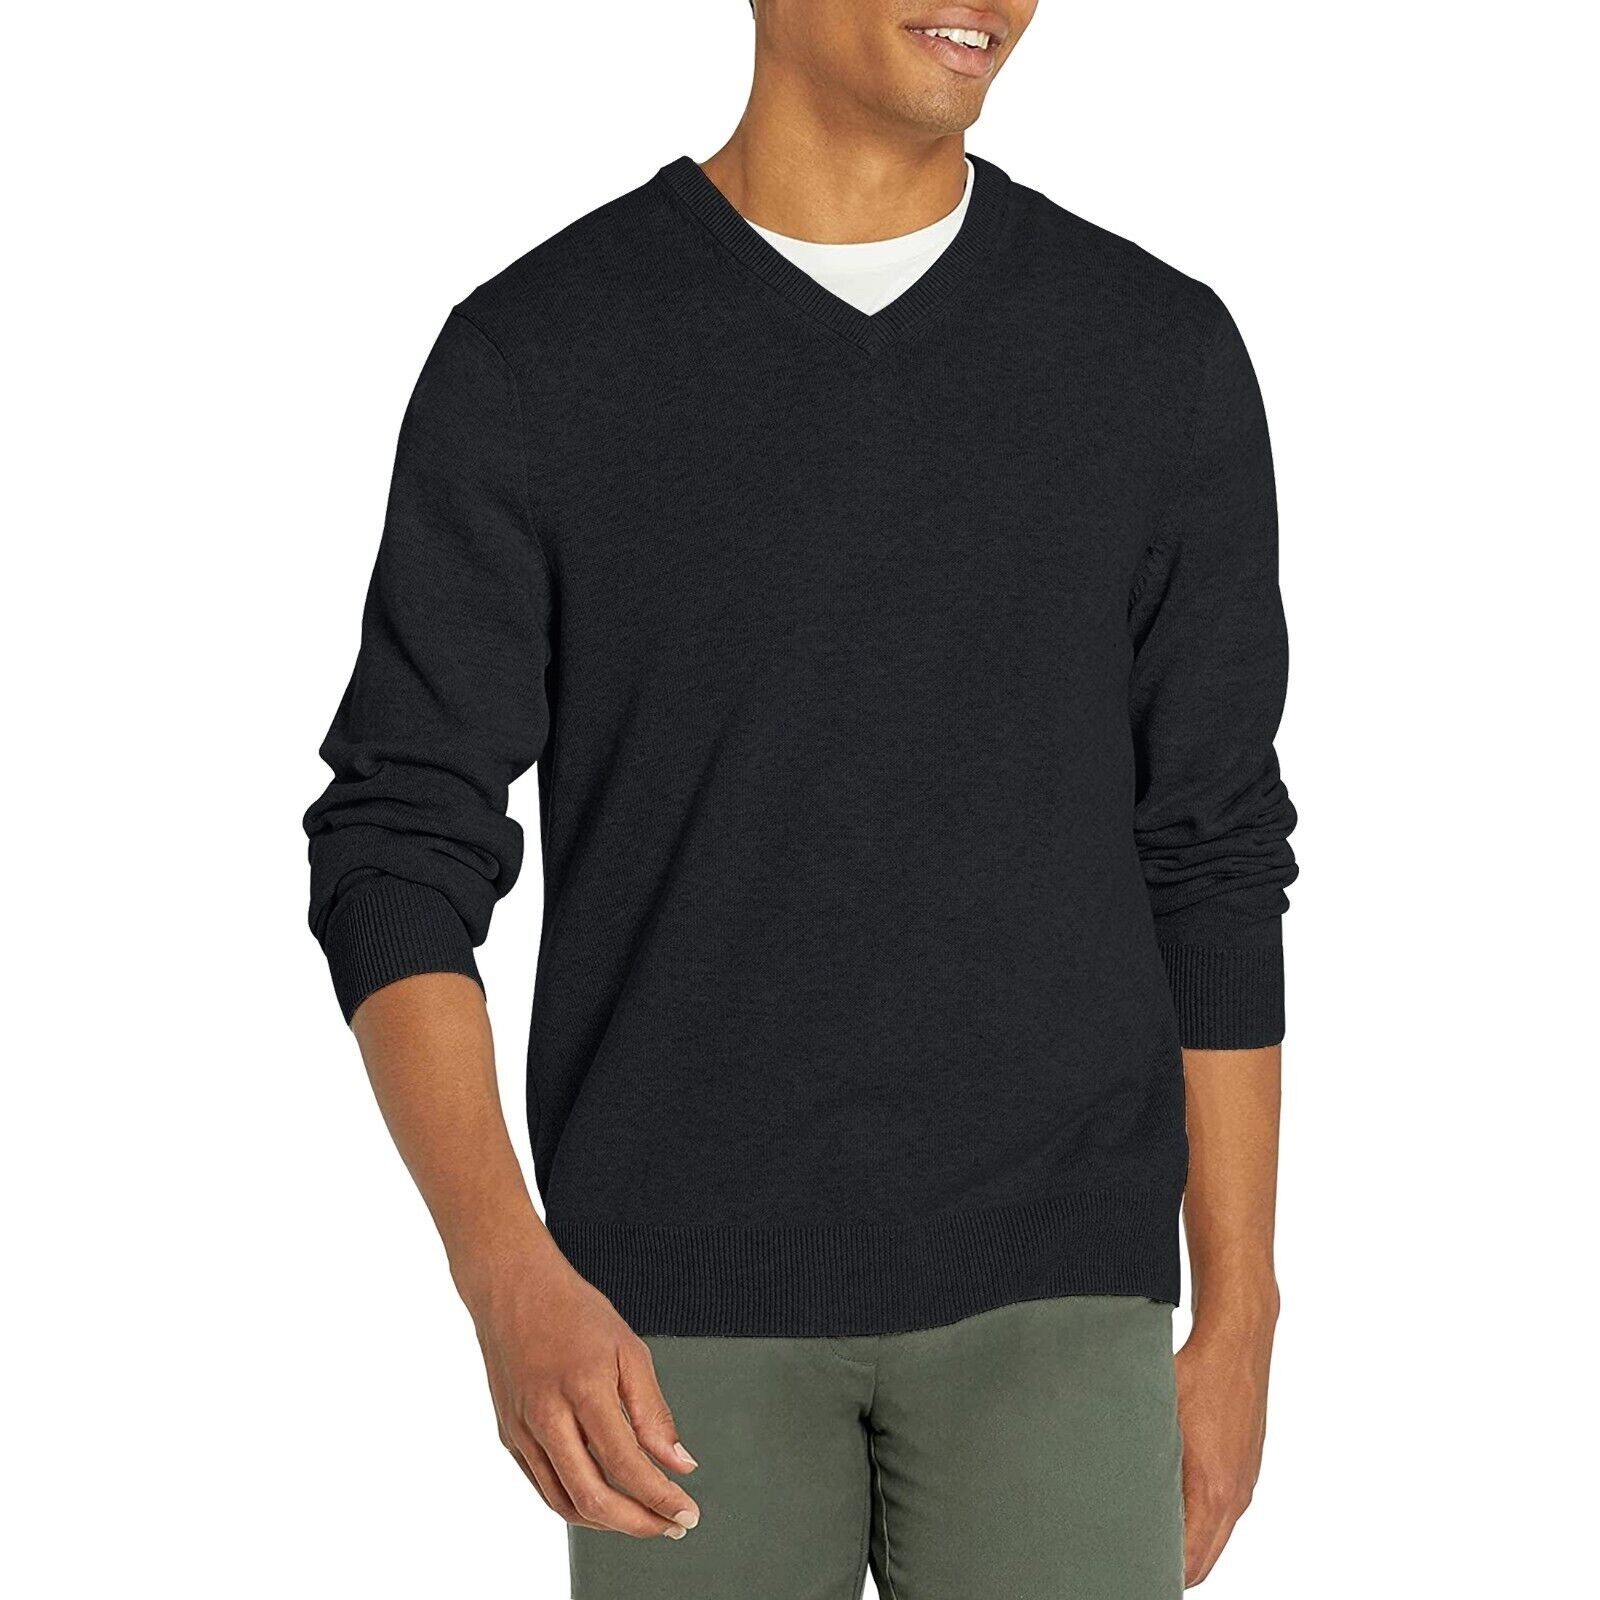 Men's Casual Ultra-Soft Slim Fit Warm Knit Pullover V-Neck Sweater For Winter - Grey, Small